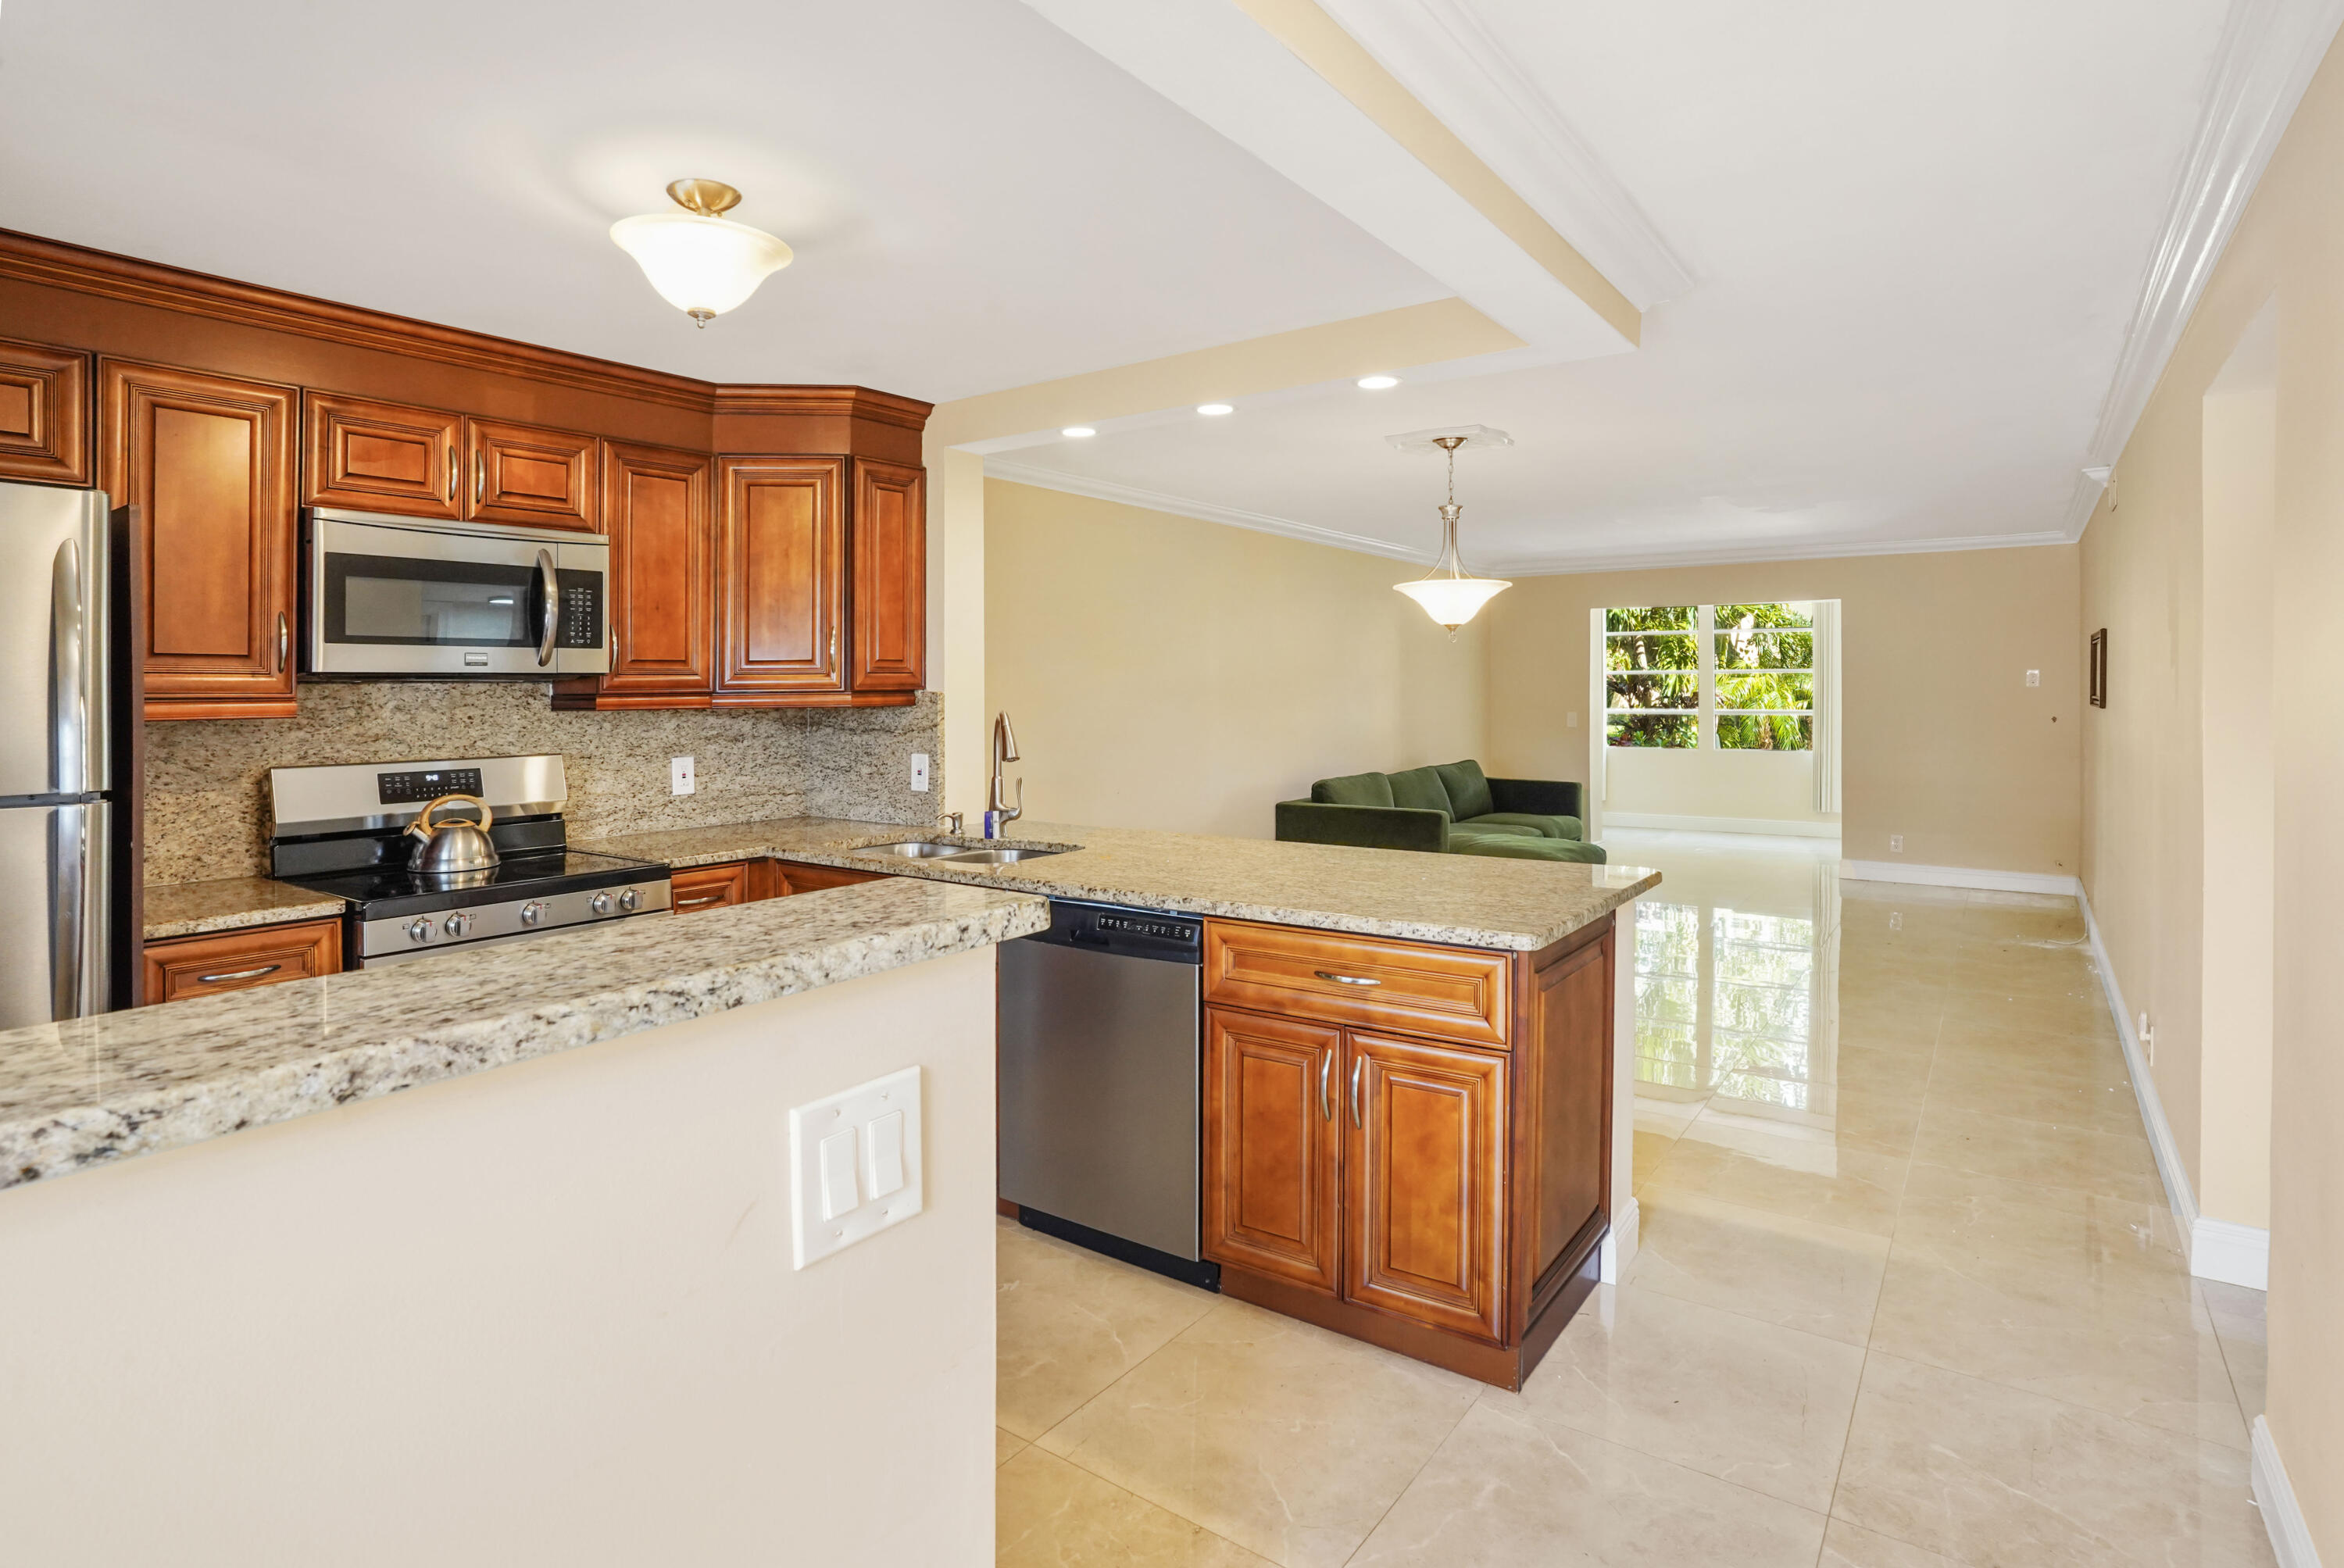 a kitchen with stainless steel appliances granite countertop a stove sink microwave and refrigerator